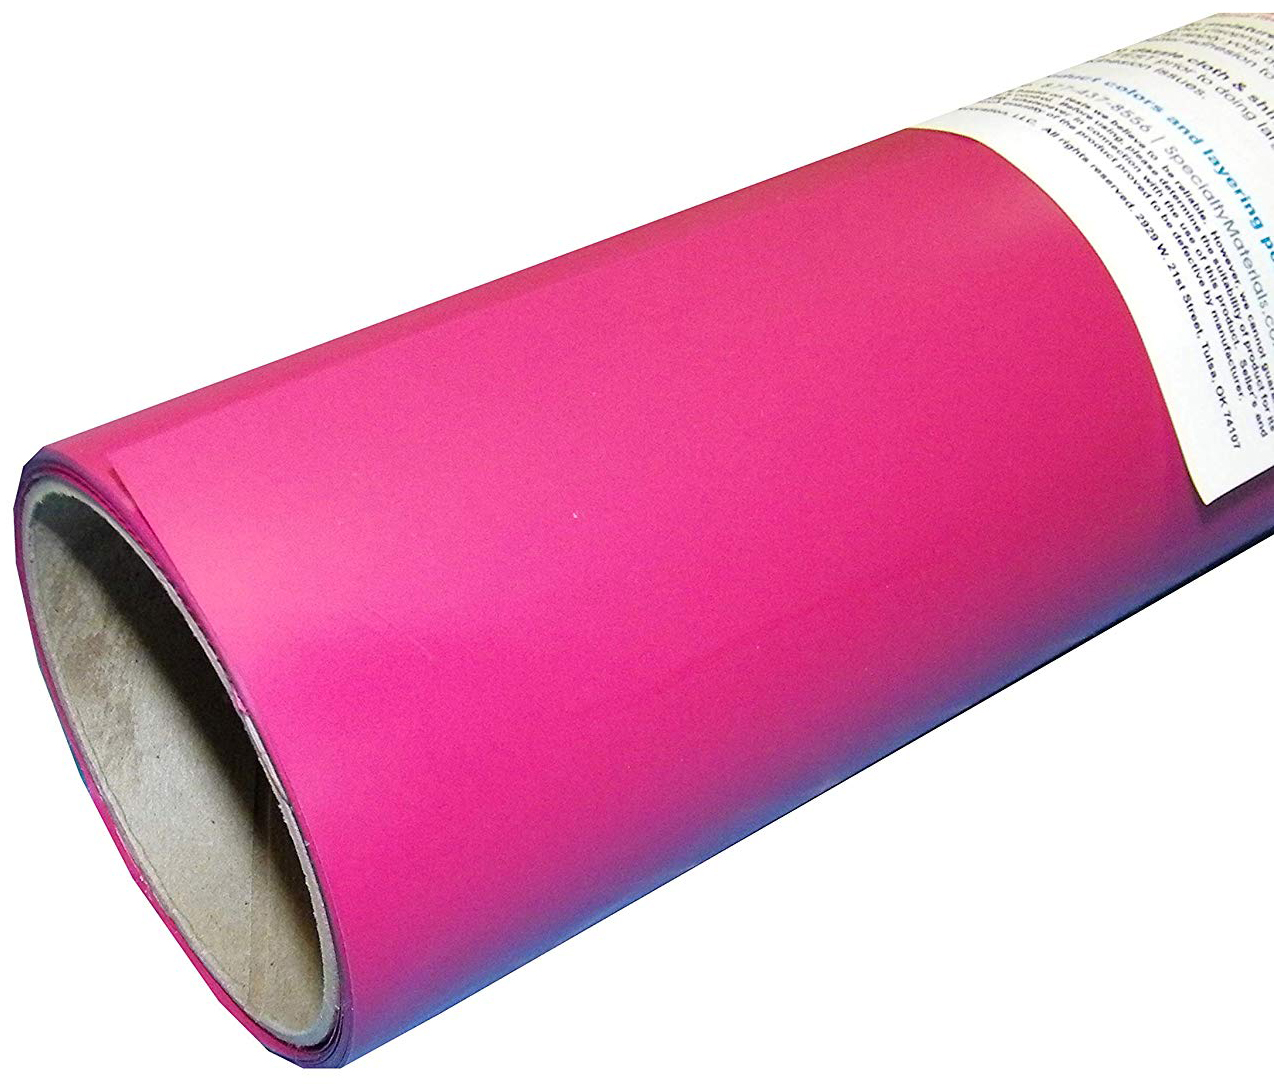 Specialty Materials ThermoFlexXTRA Pink - Specialty Materials ThermoFlex Xtra Heat Transfer Film